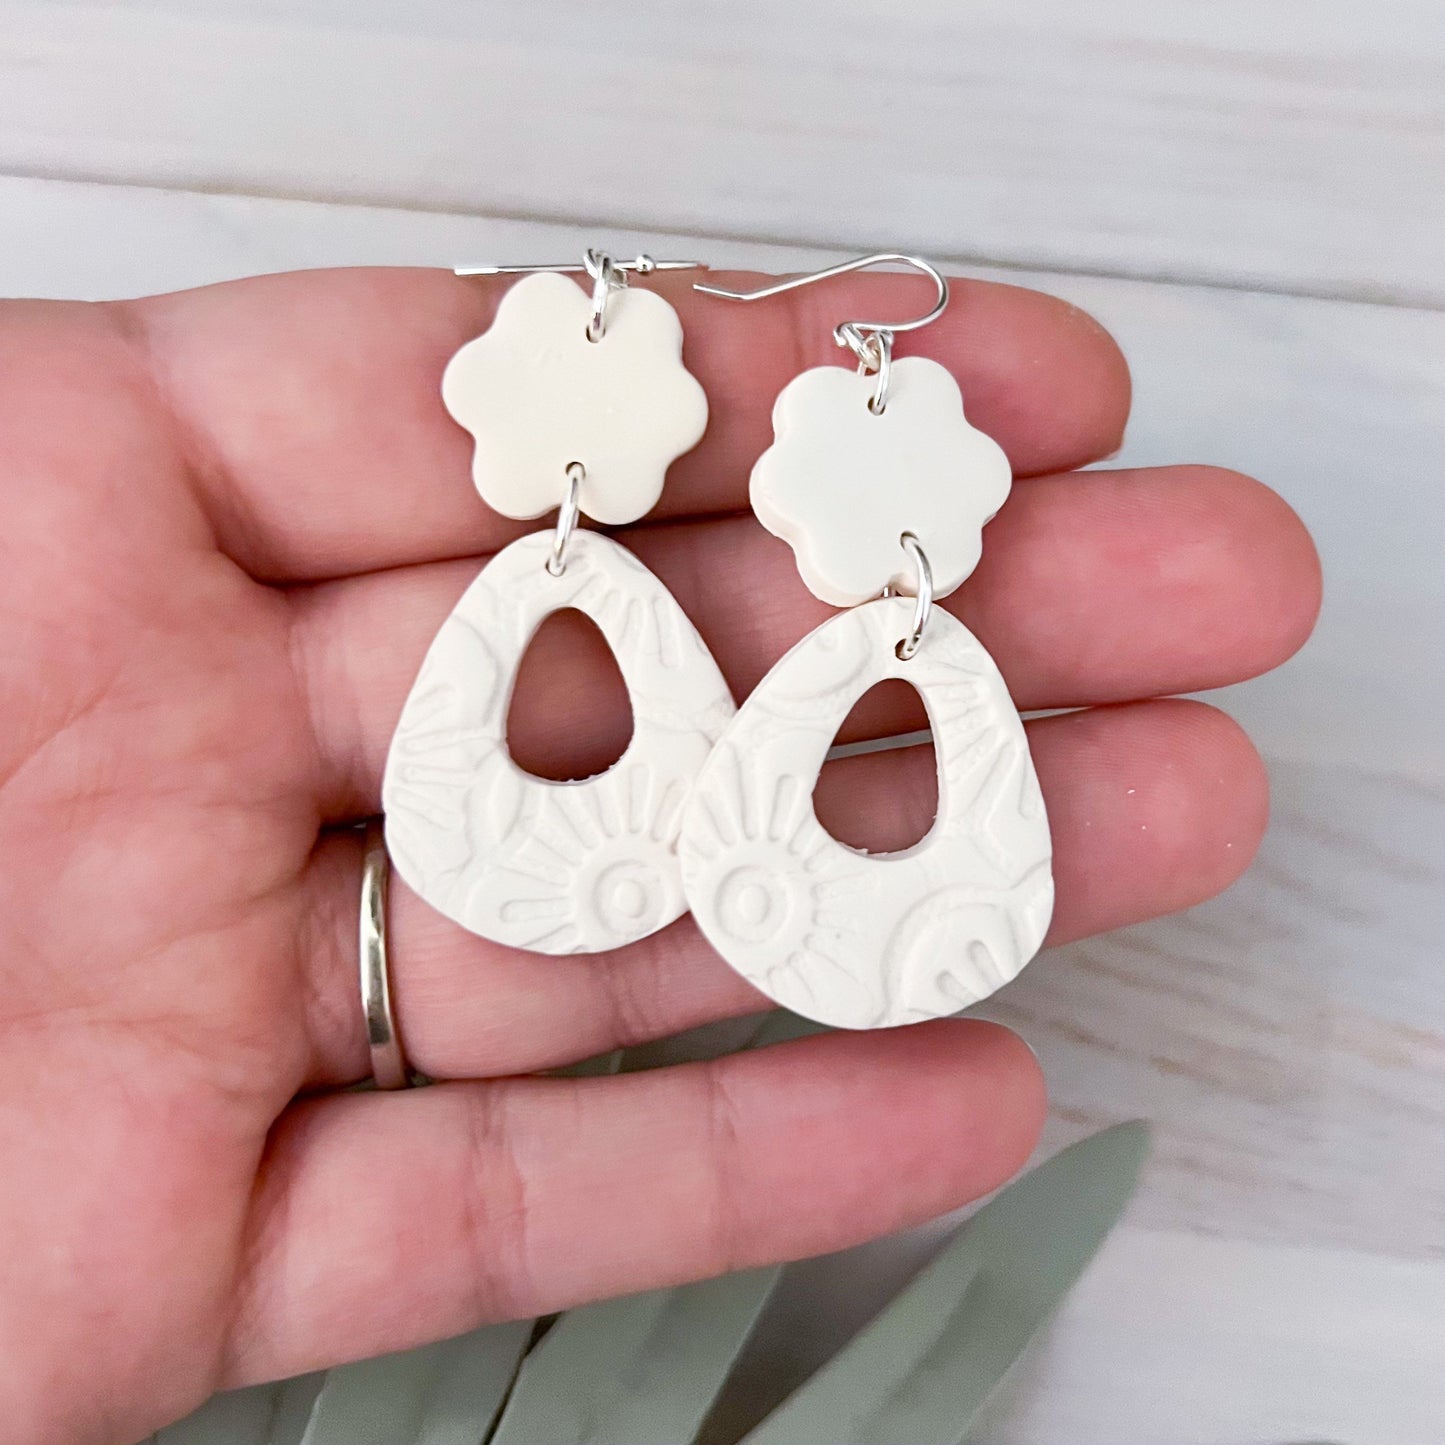 Floral Textured Clay Dangle Earrings | Handmade Lightweight Polymer Clay Earrings